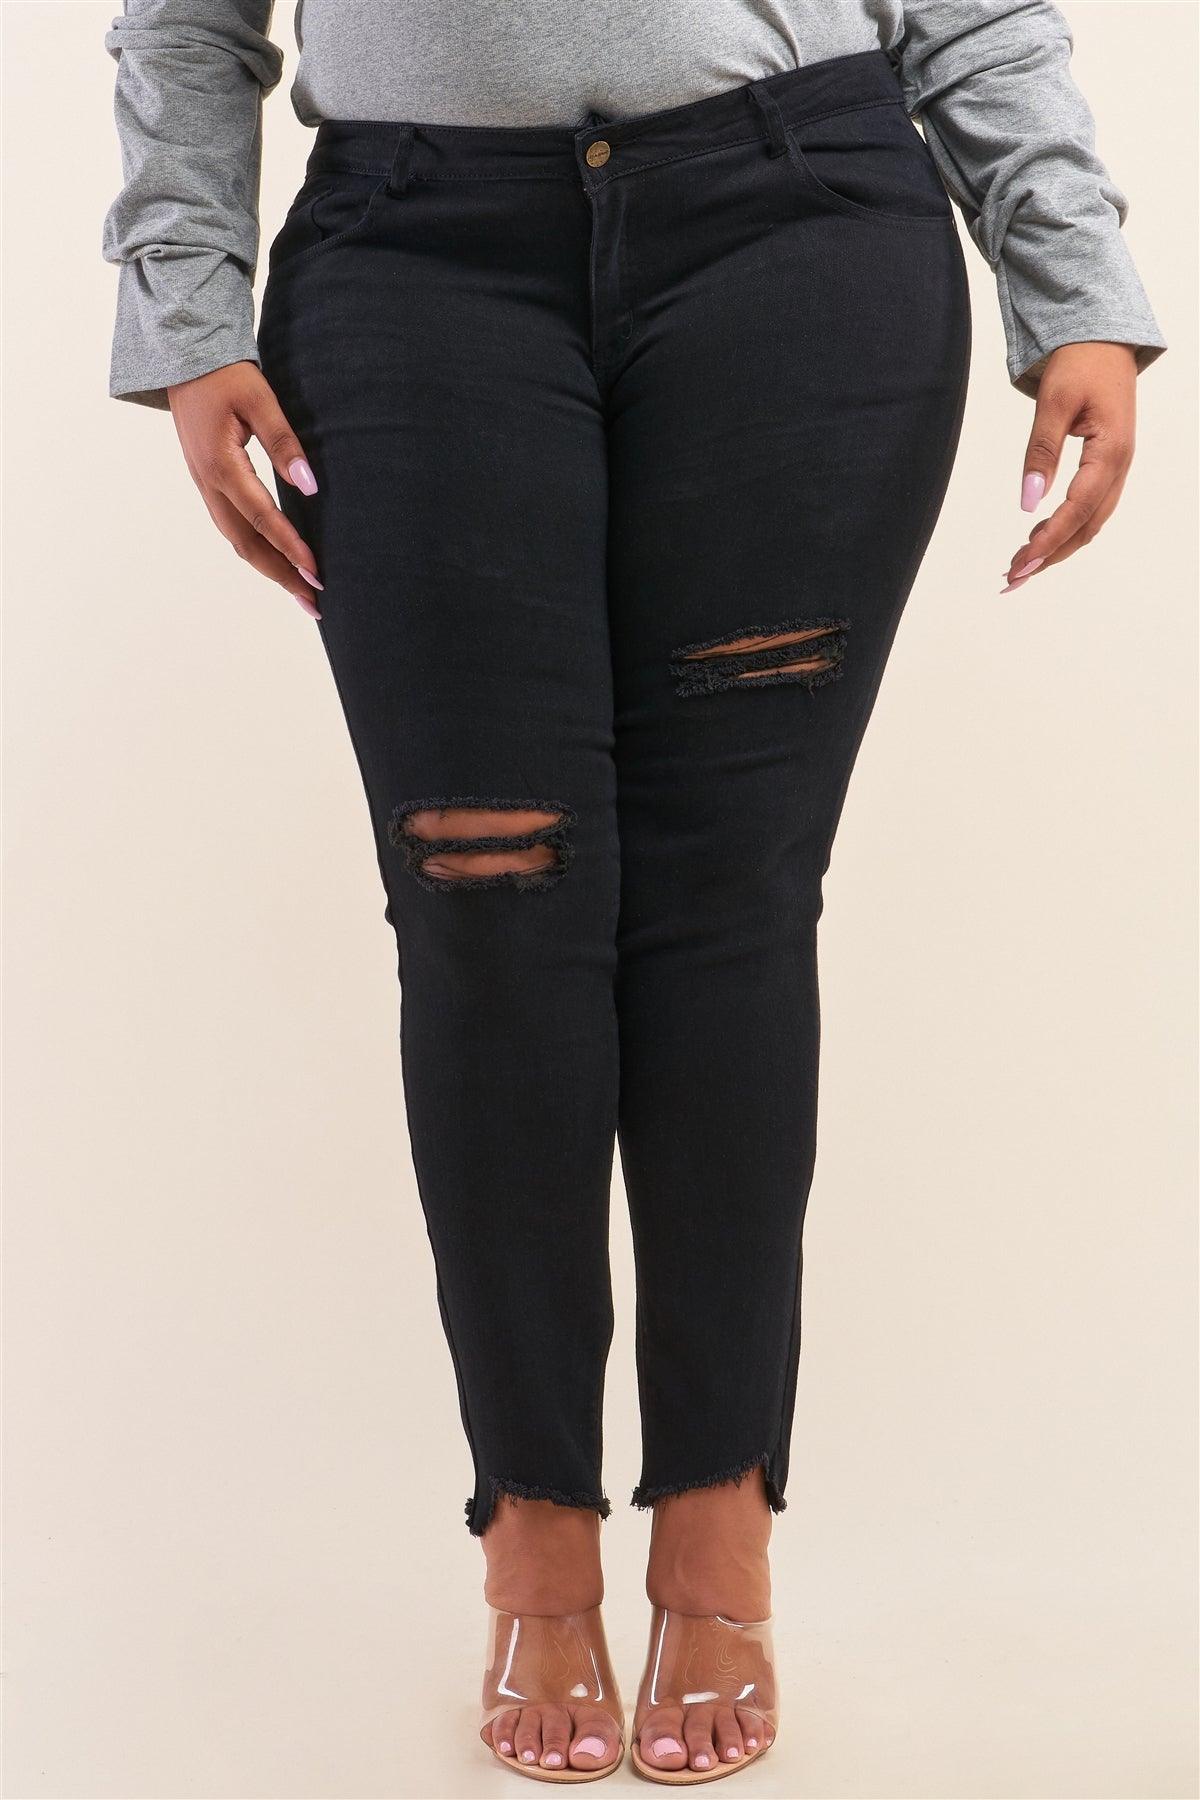 Plus Size Solid Black Low-Mid Rise Tight Fit Ripped Denim Jeans